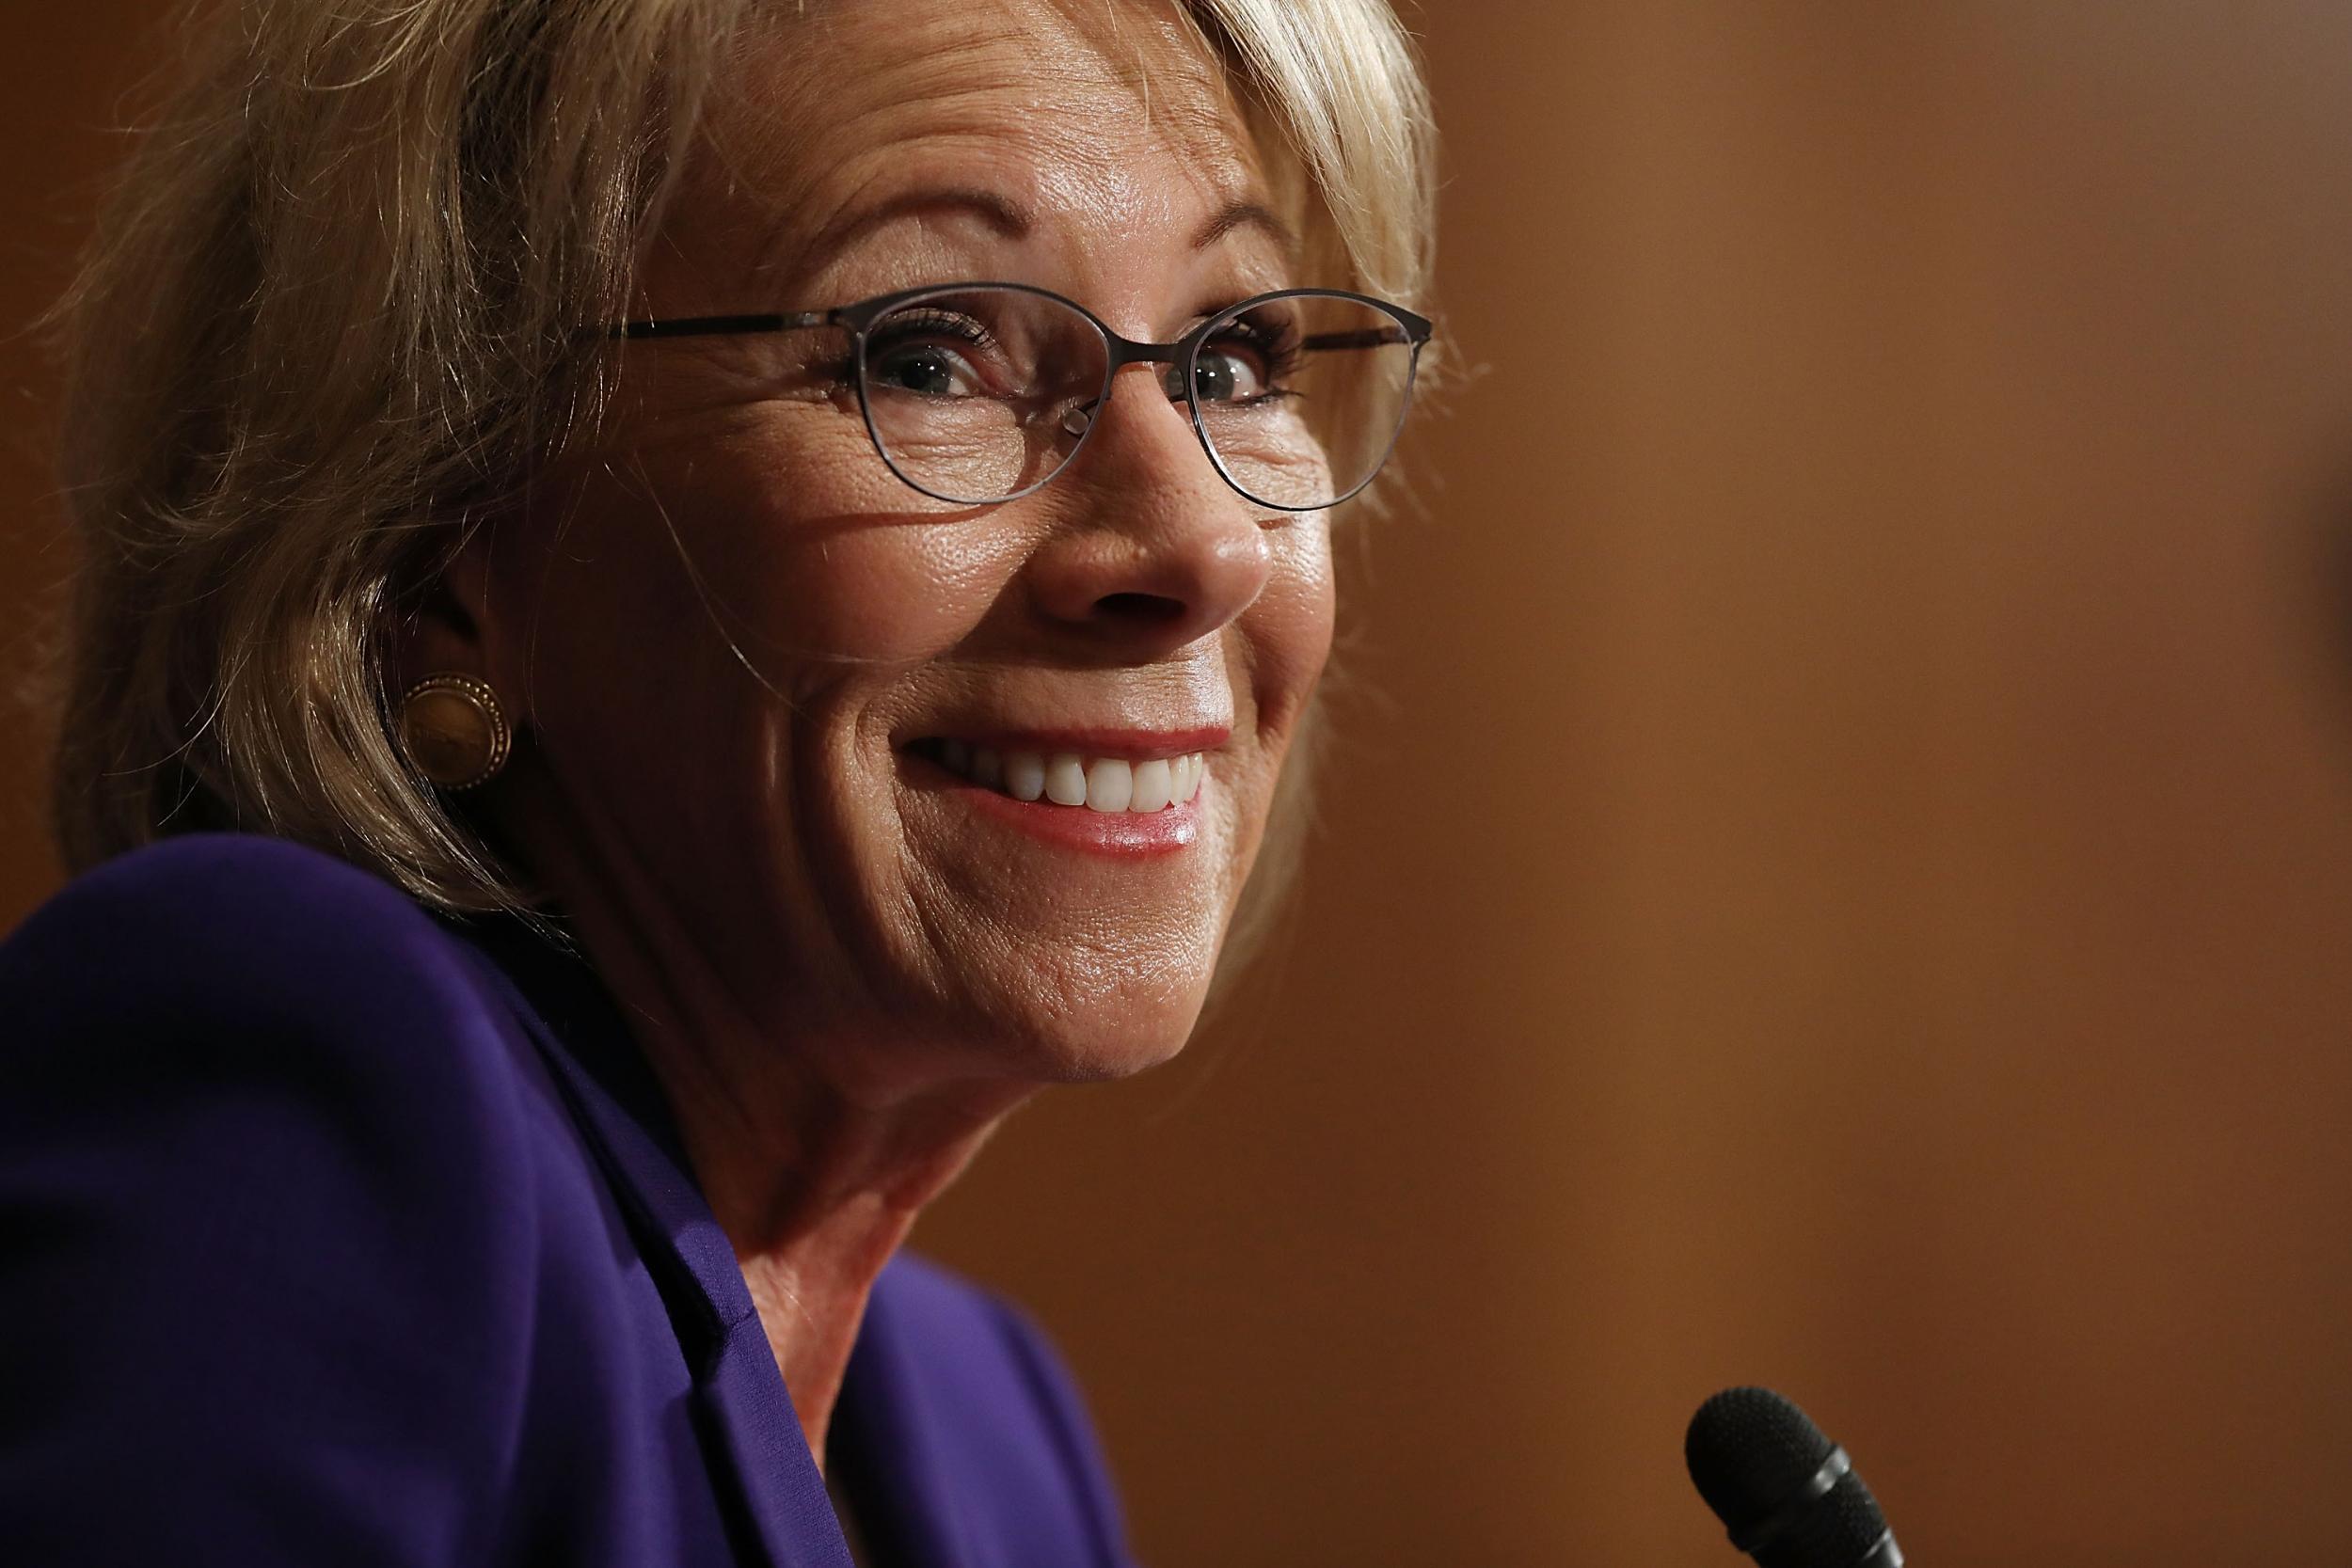 Ms DeVos is pro-school choice, which could divert federal funds from free schools